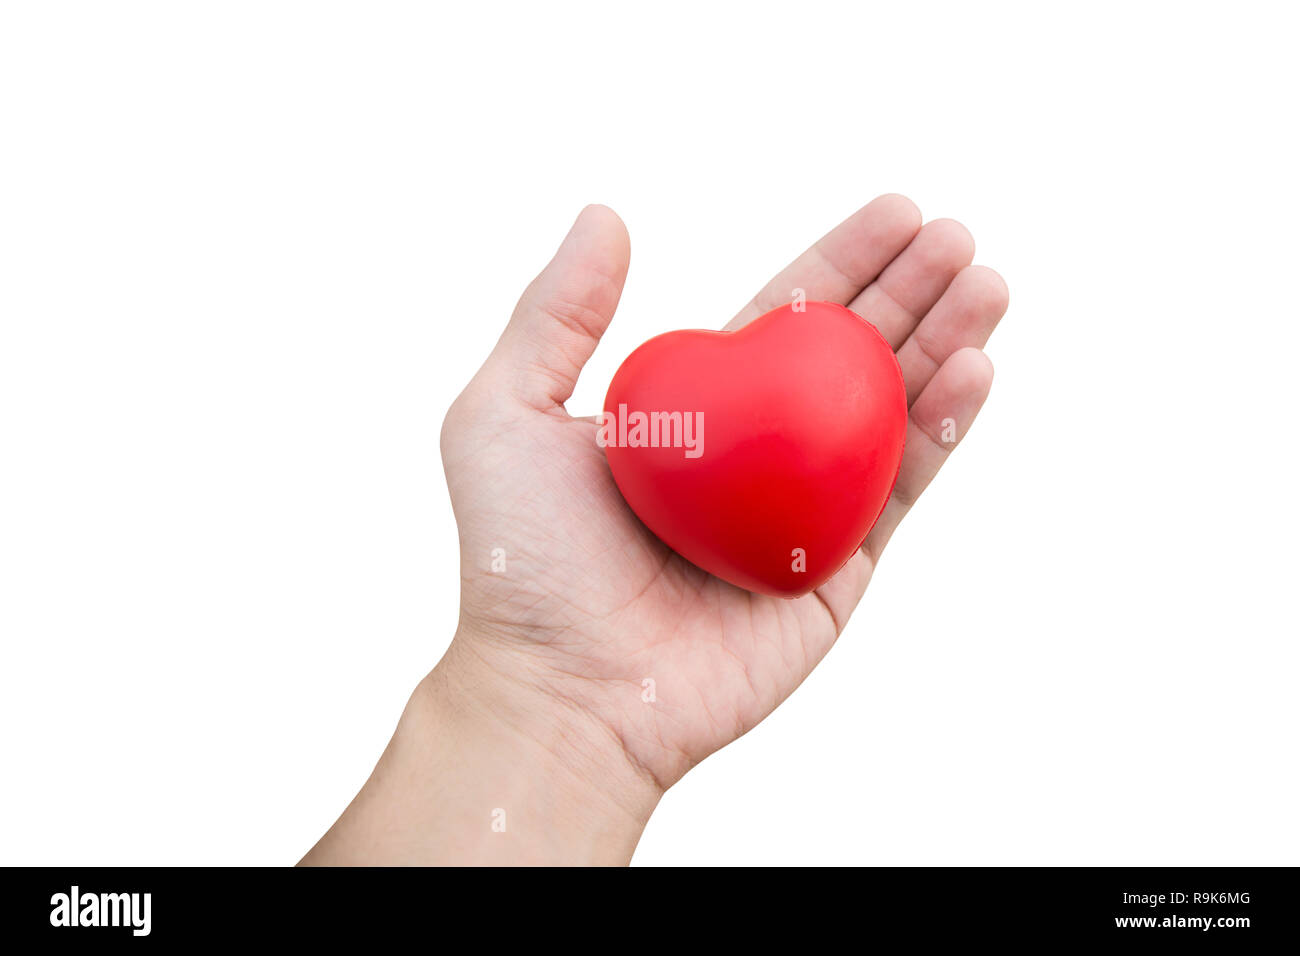 Red heart ball : Stress reliever foam ball the red heart shape on woman hand isolated on white background with clipping path Stock Photo